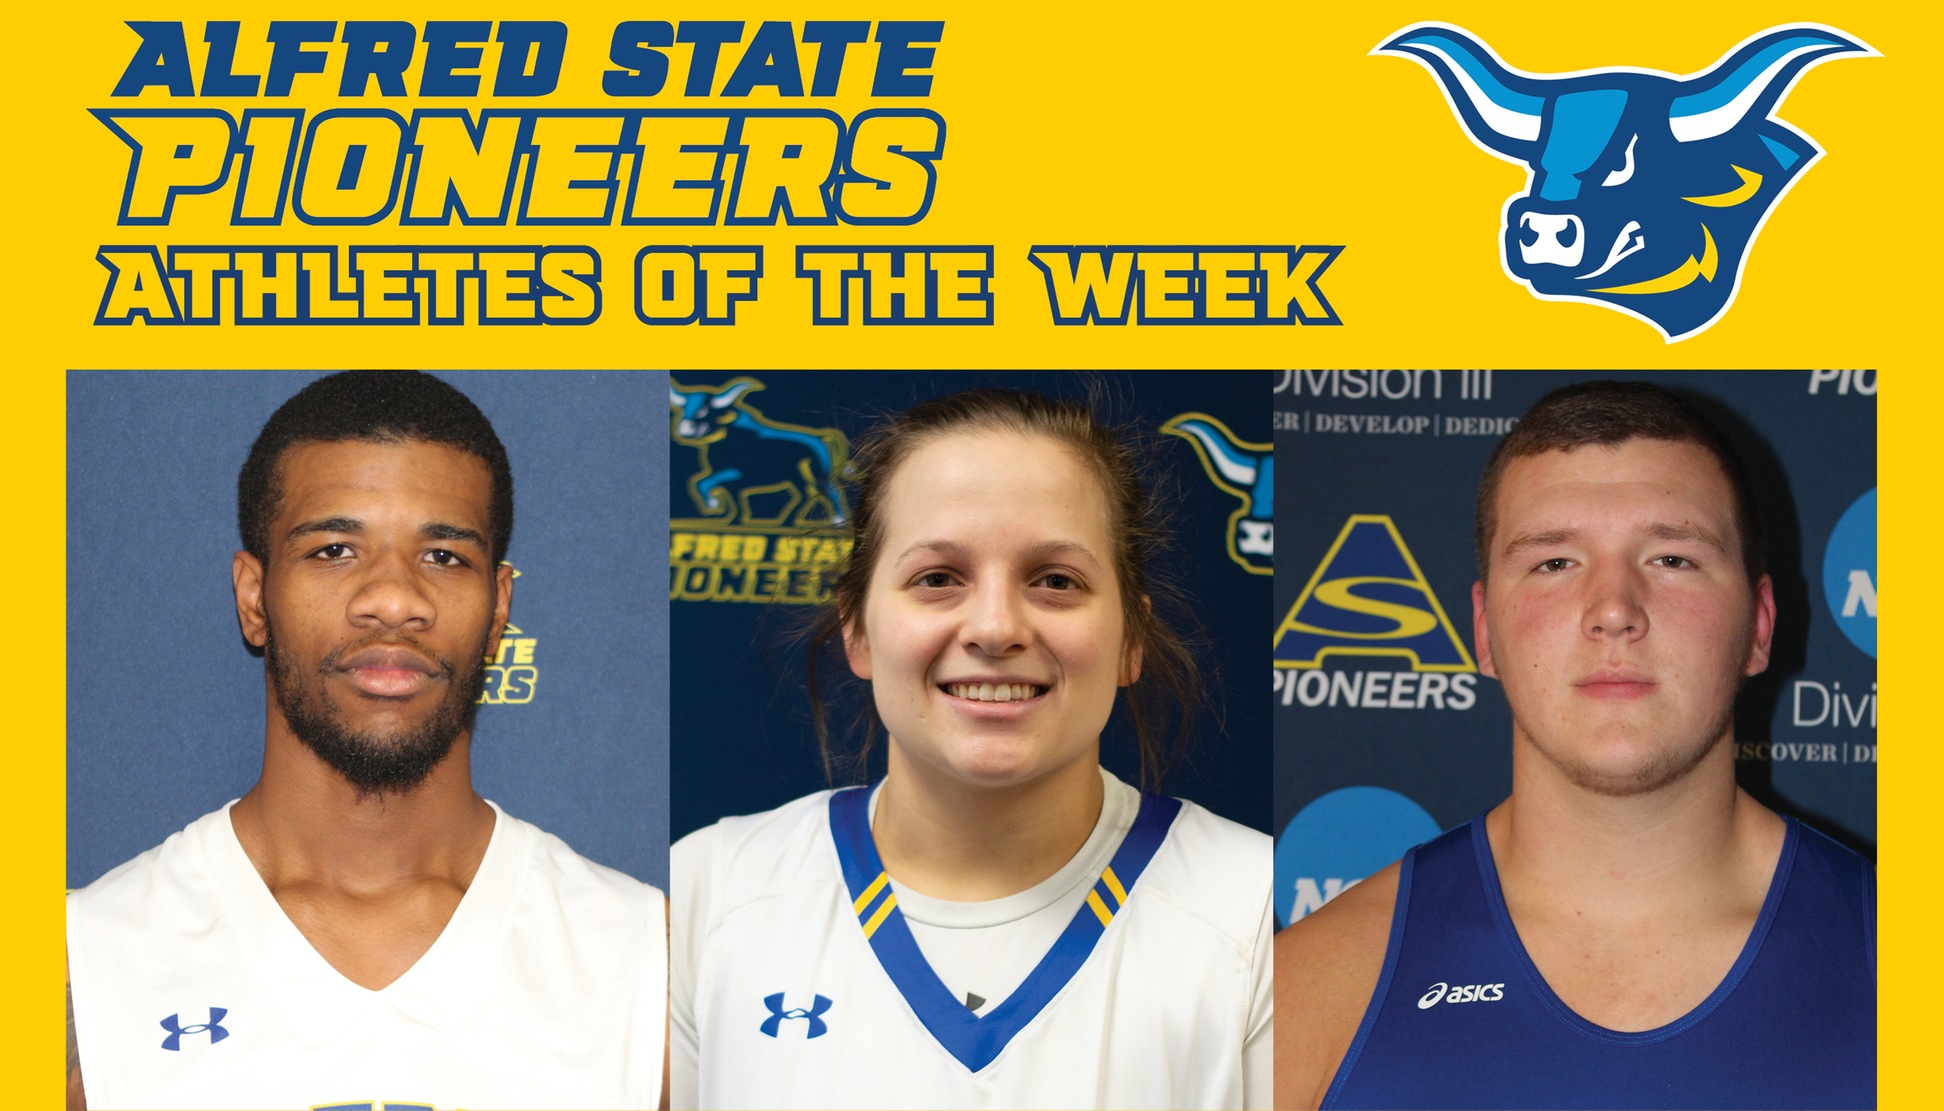 Taj Lewis, Ray Anderson, and Paul Kemsley Named Athletes of the Week.